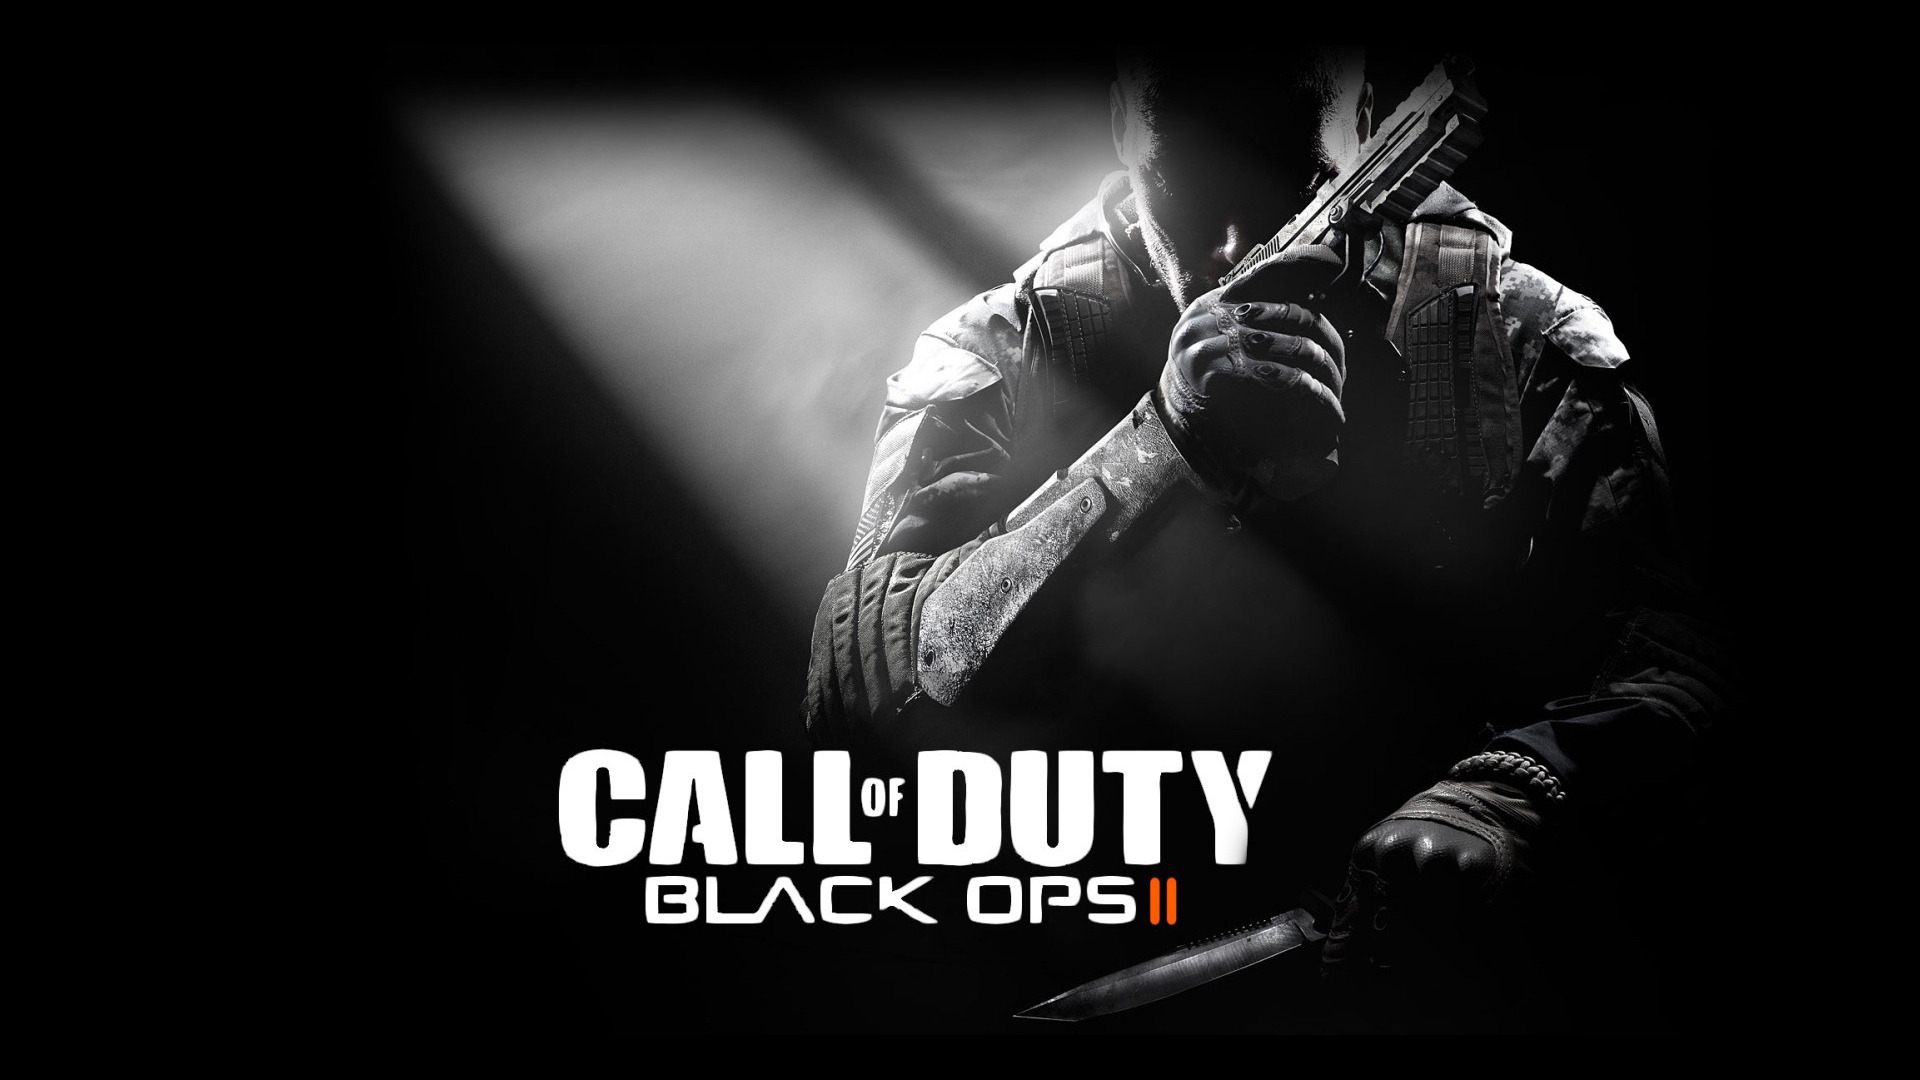 Call of Duty Black Ops II for 1920 x 1080 HDTV 1080p resolution